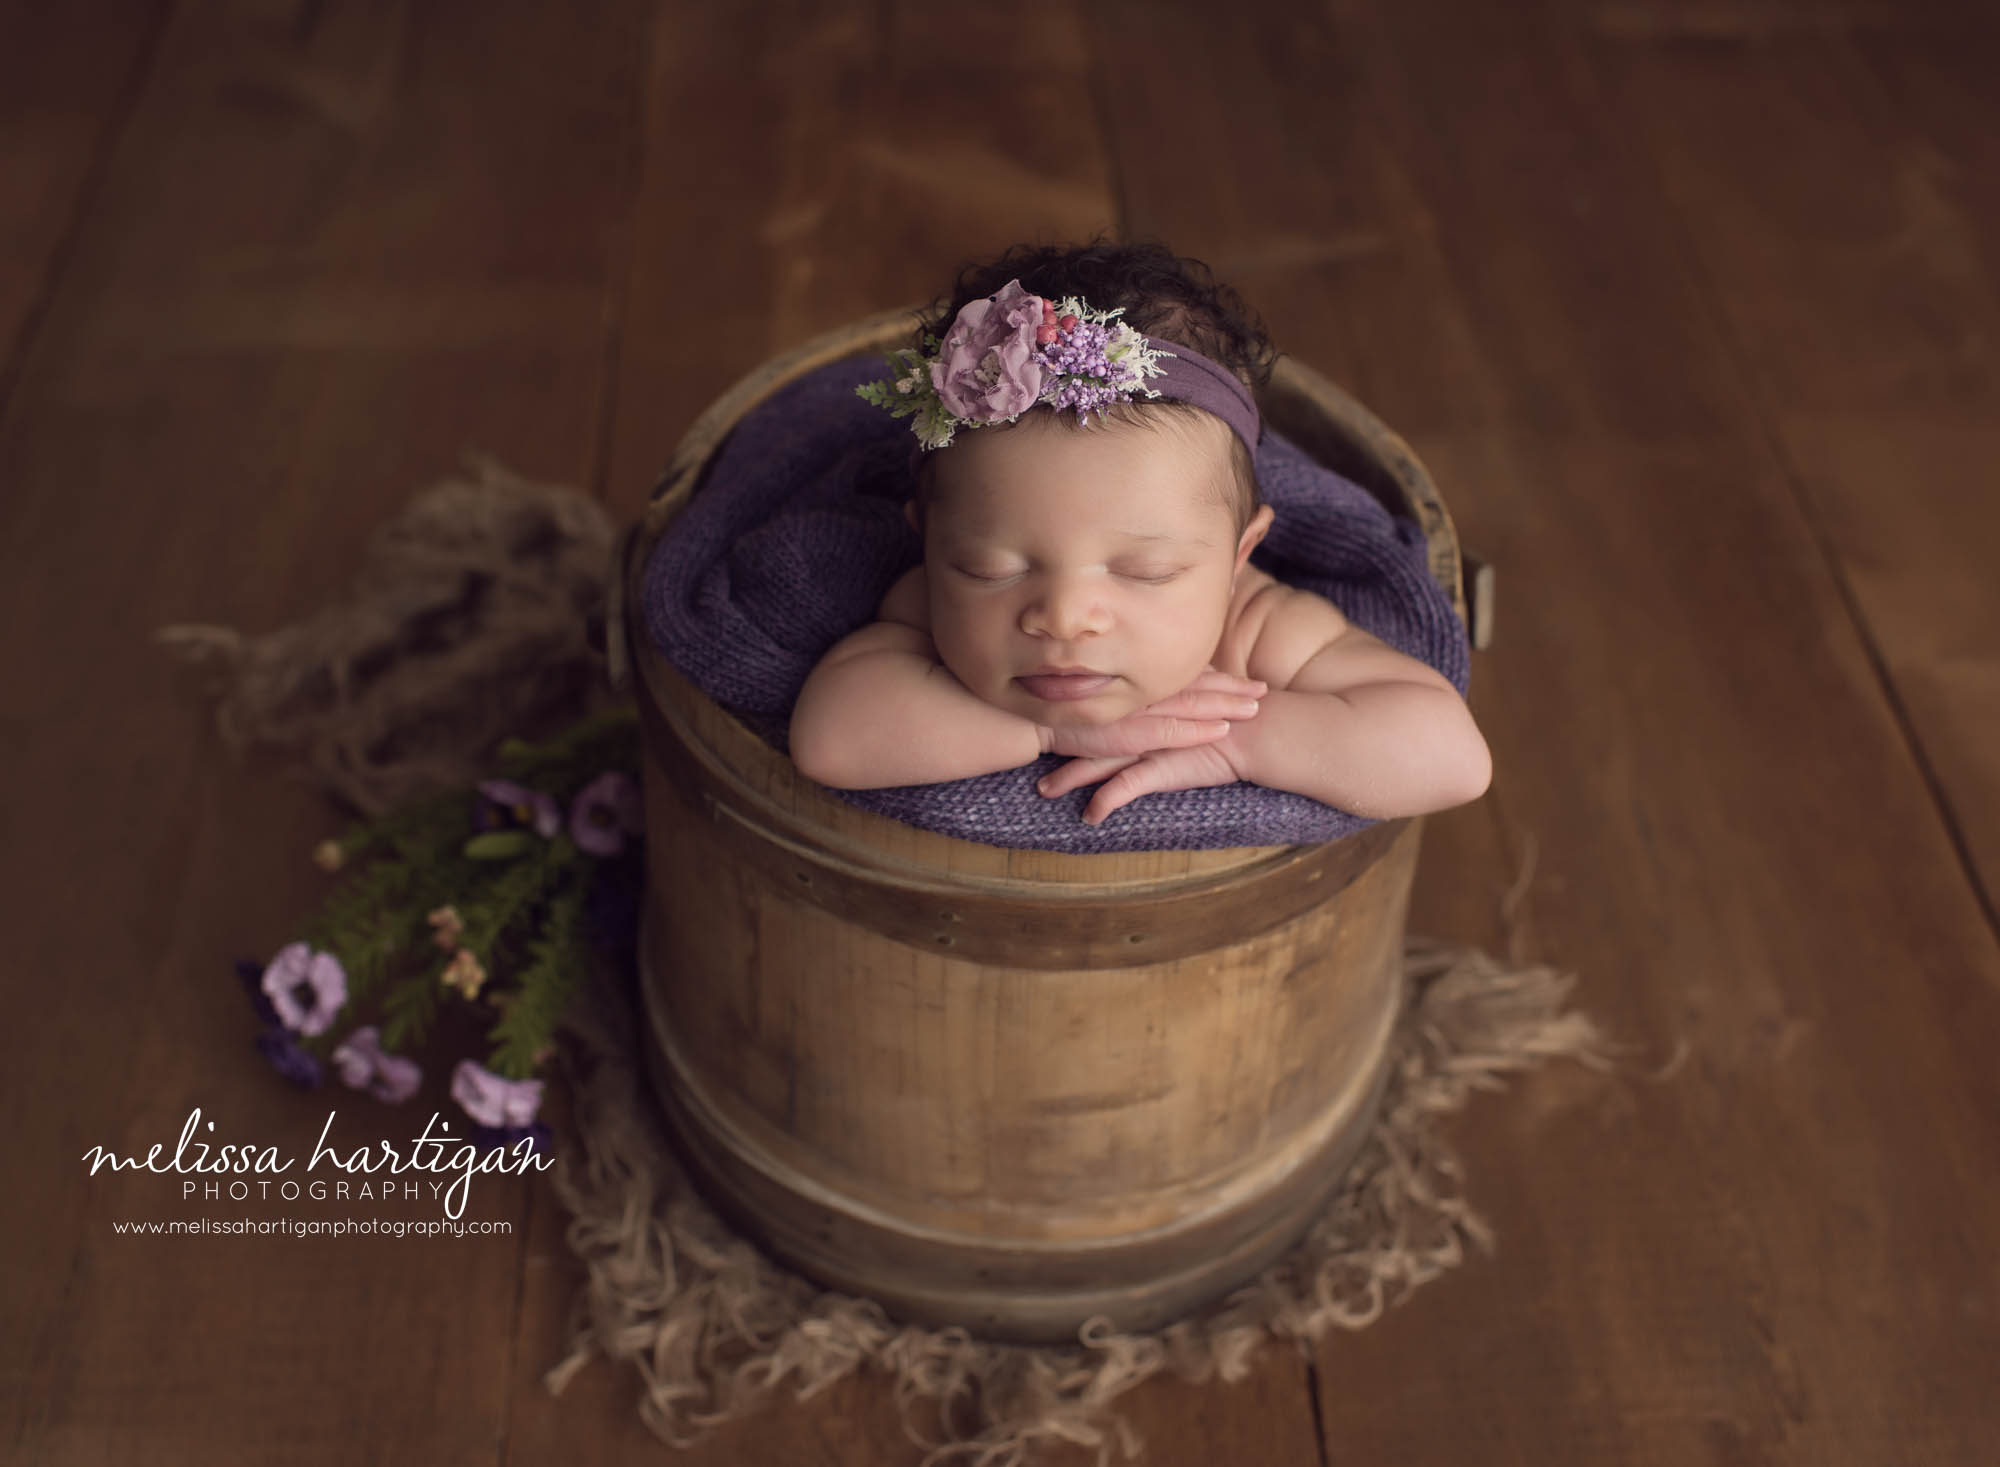 Baby girl posed chin on hands in rustic bucket with purple tones and flowers newborn photography session in CT studio